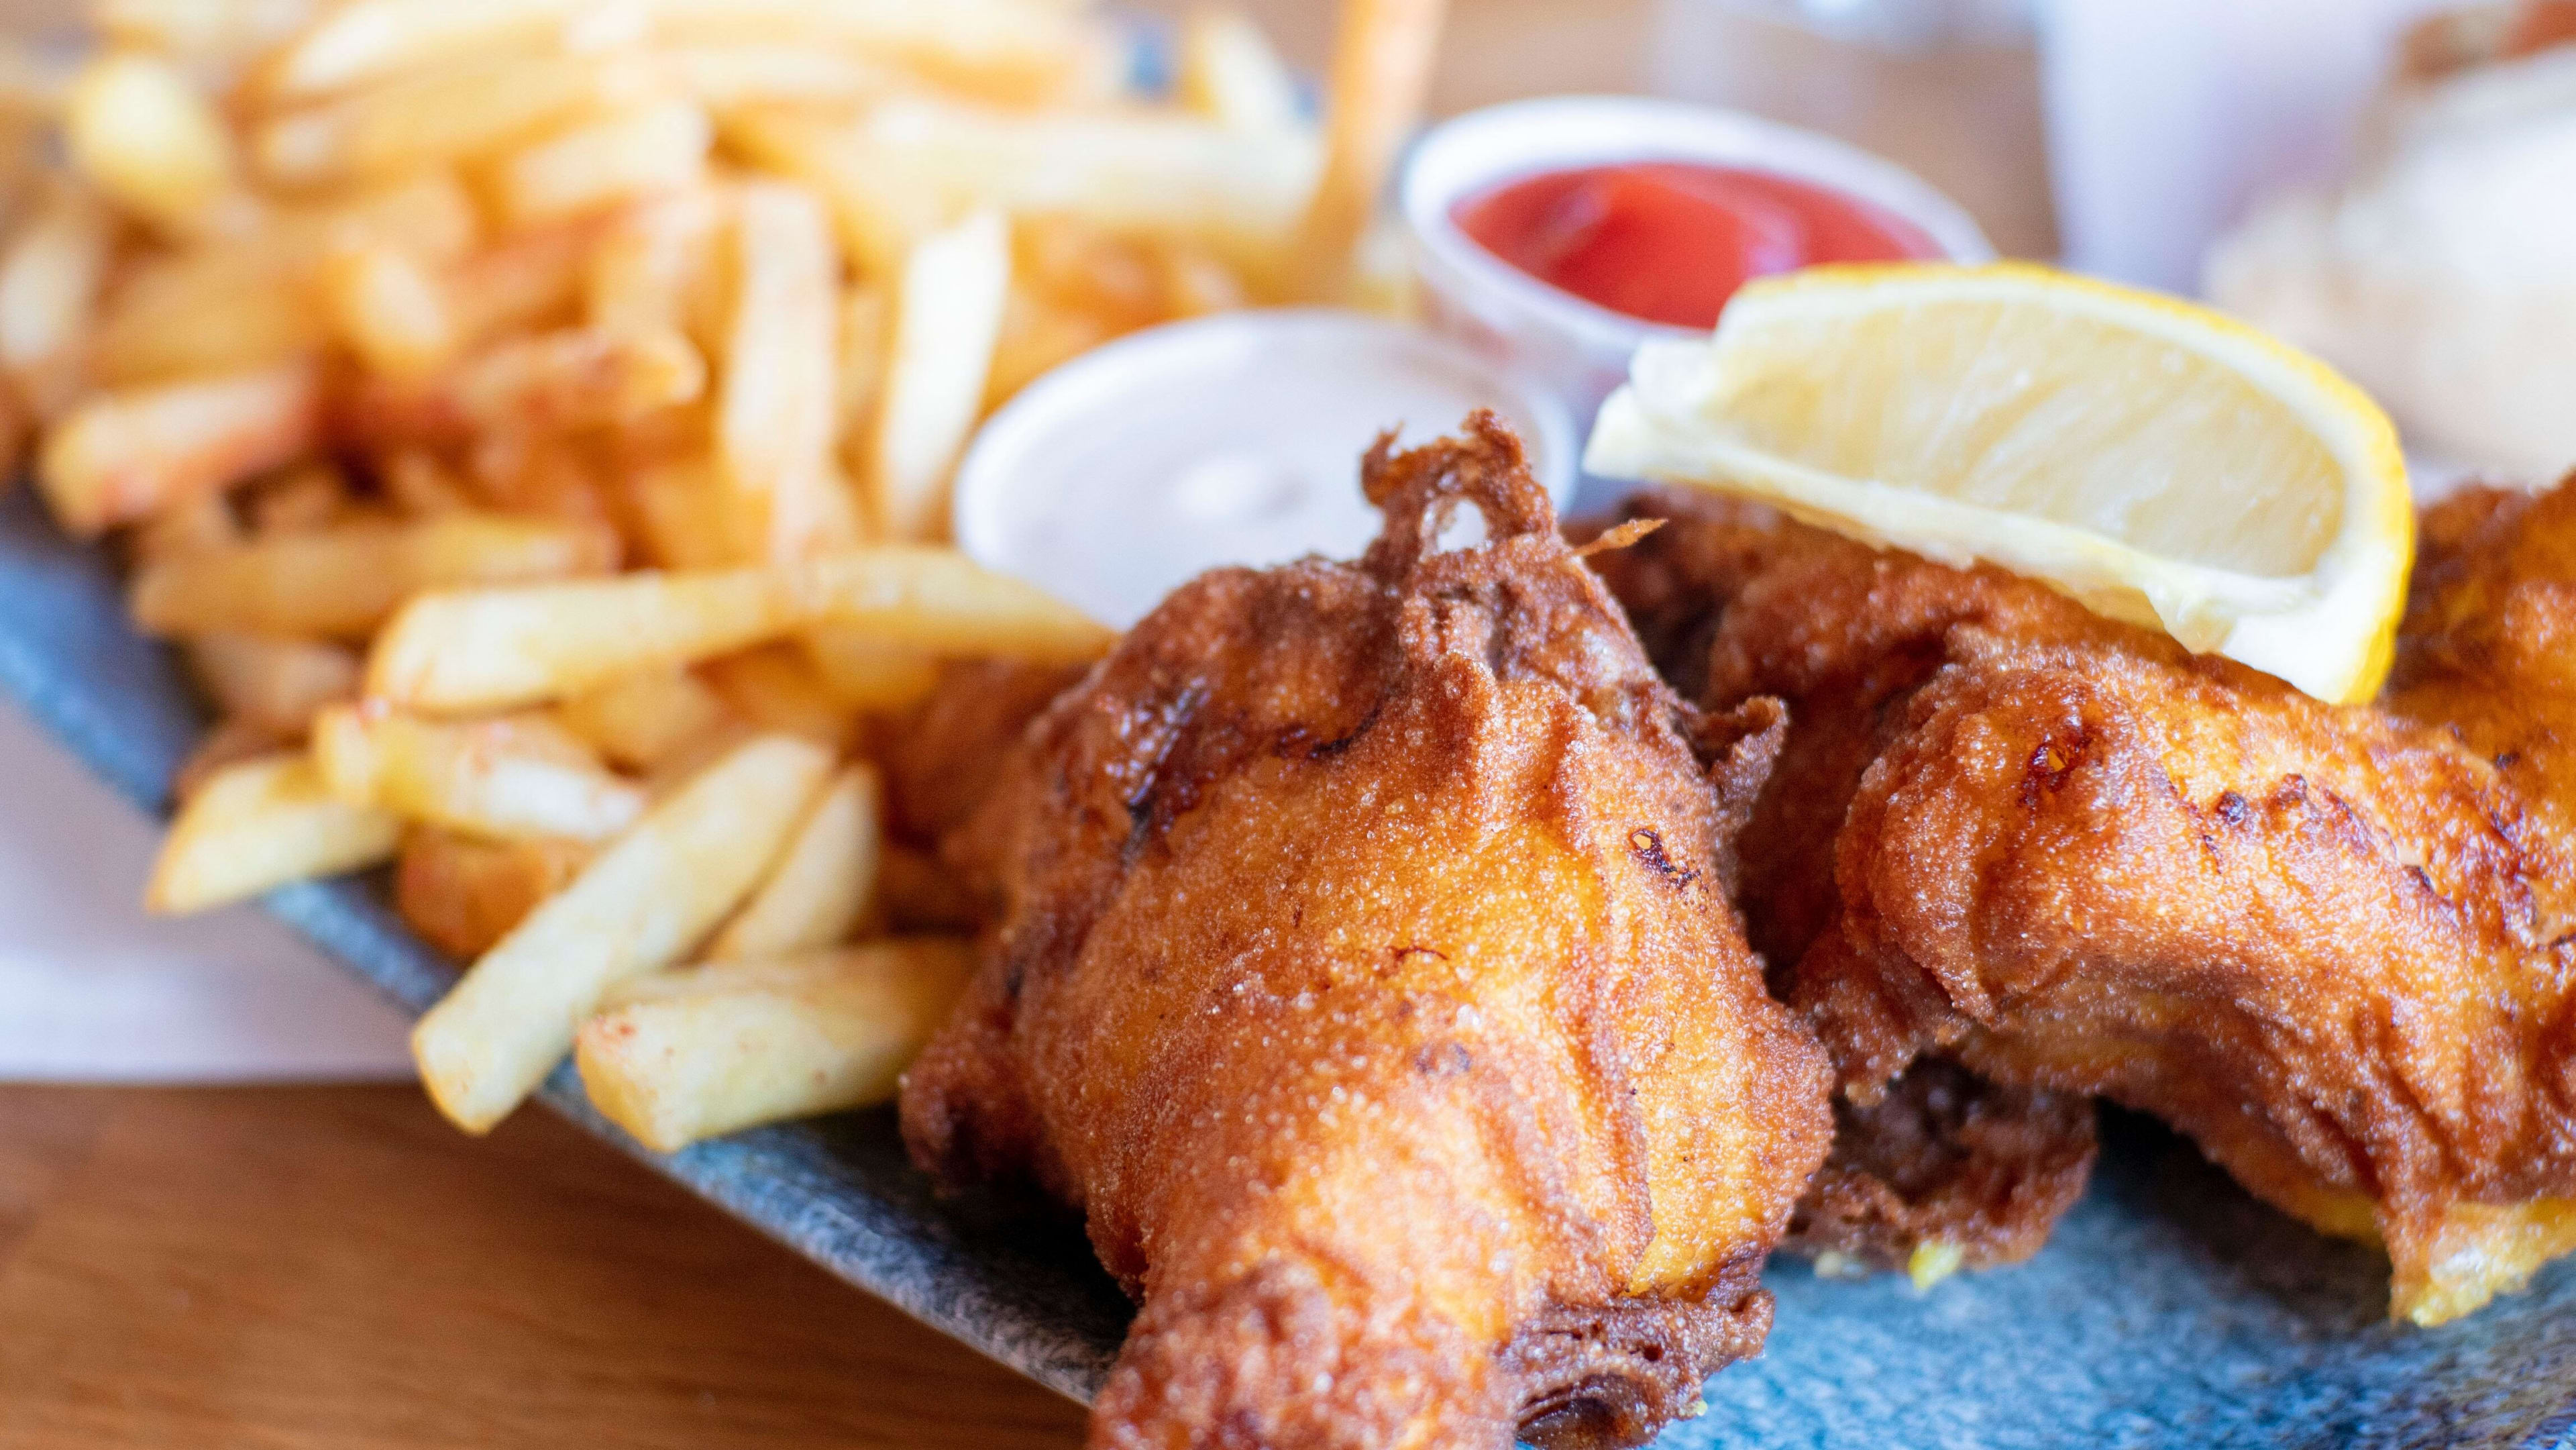 This Good Friday, we’re looking at our favourite fish and chips dishes